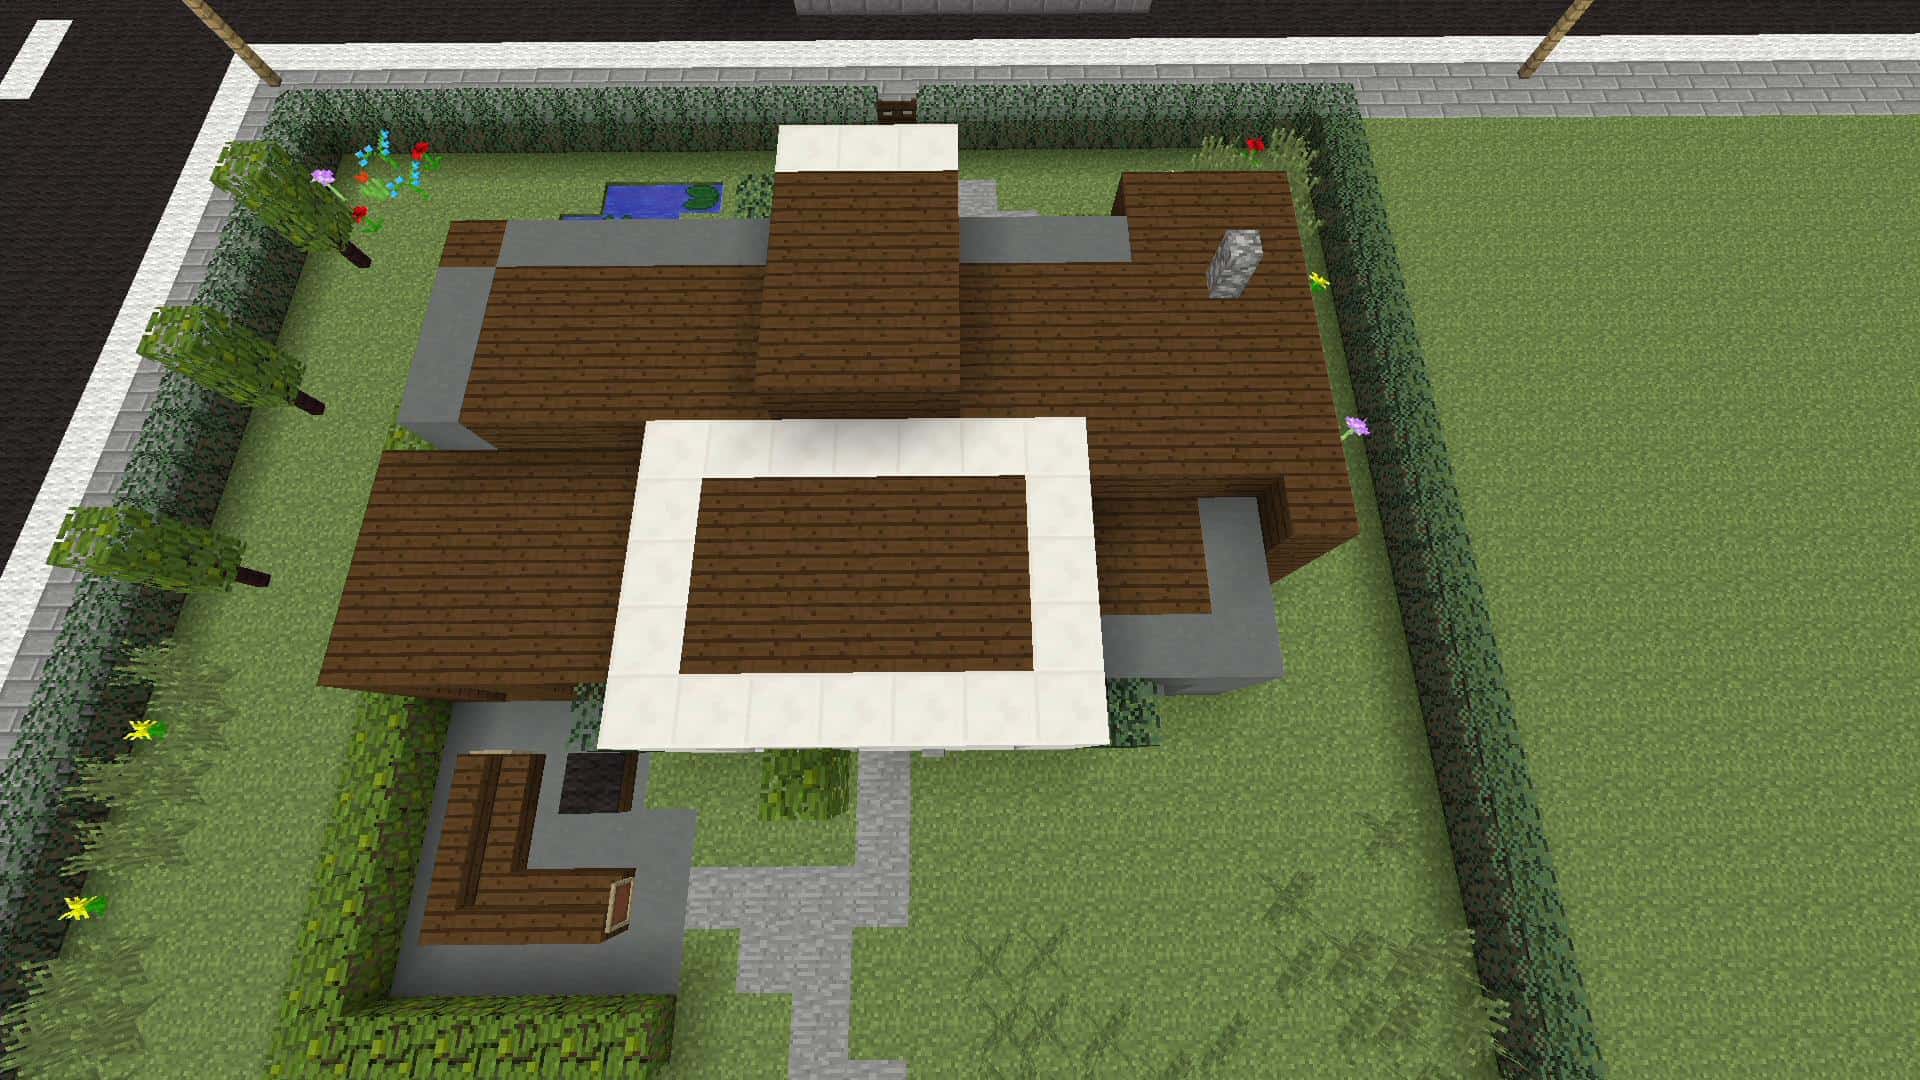 How to build a simple modern house Minecraft House Design